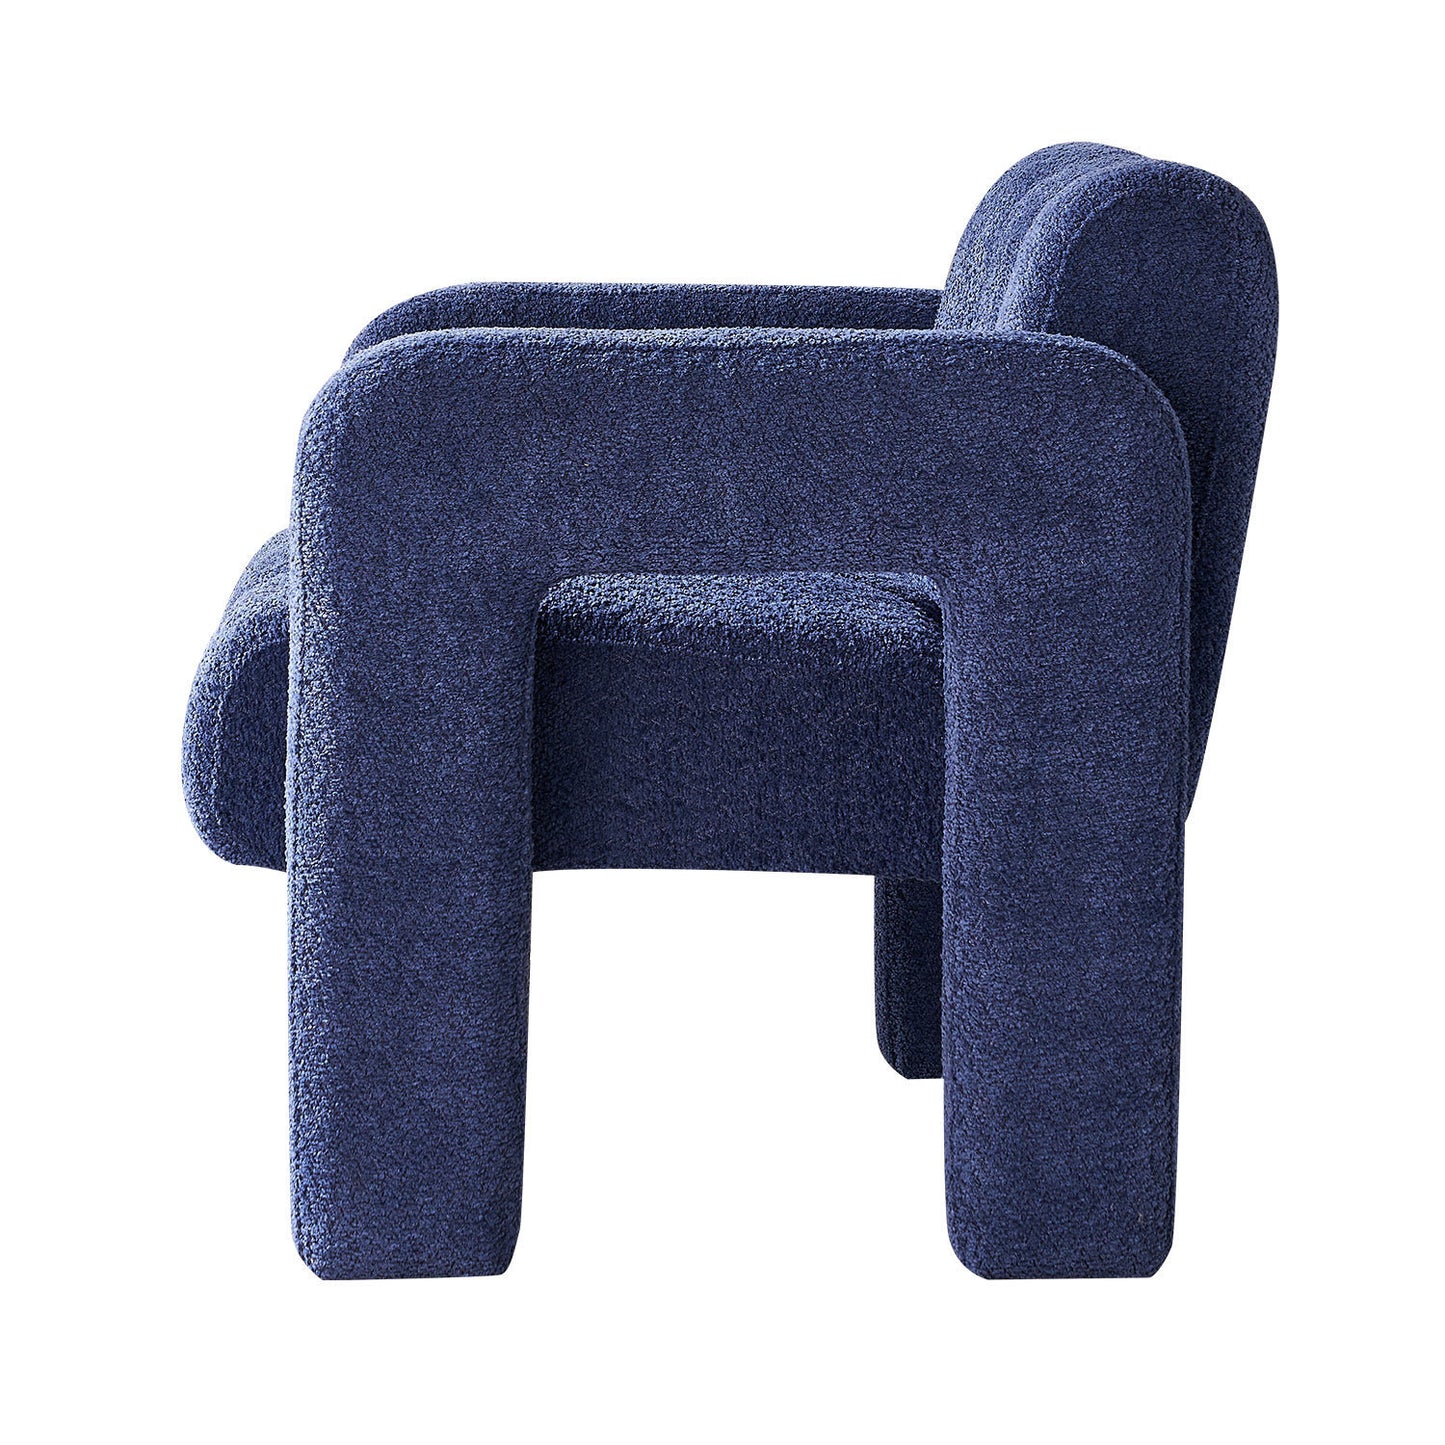 La Mer Boucle Upholstered Accent Chair, Navy